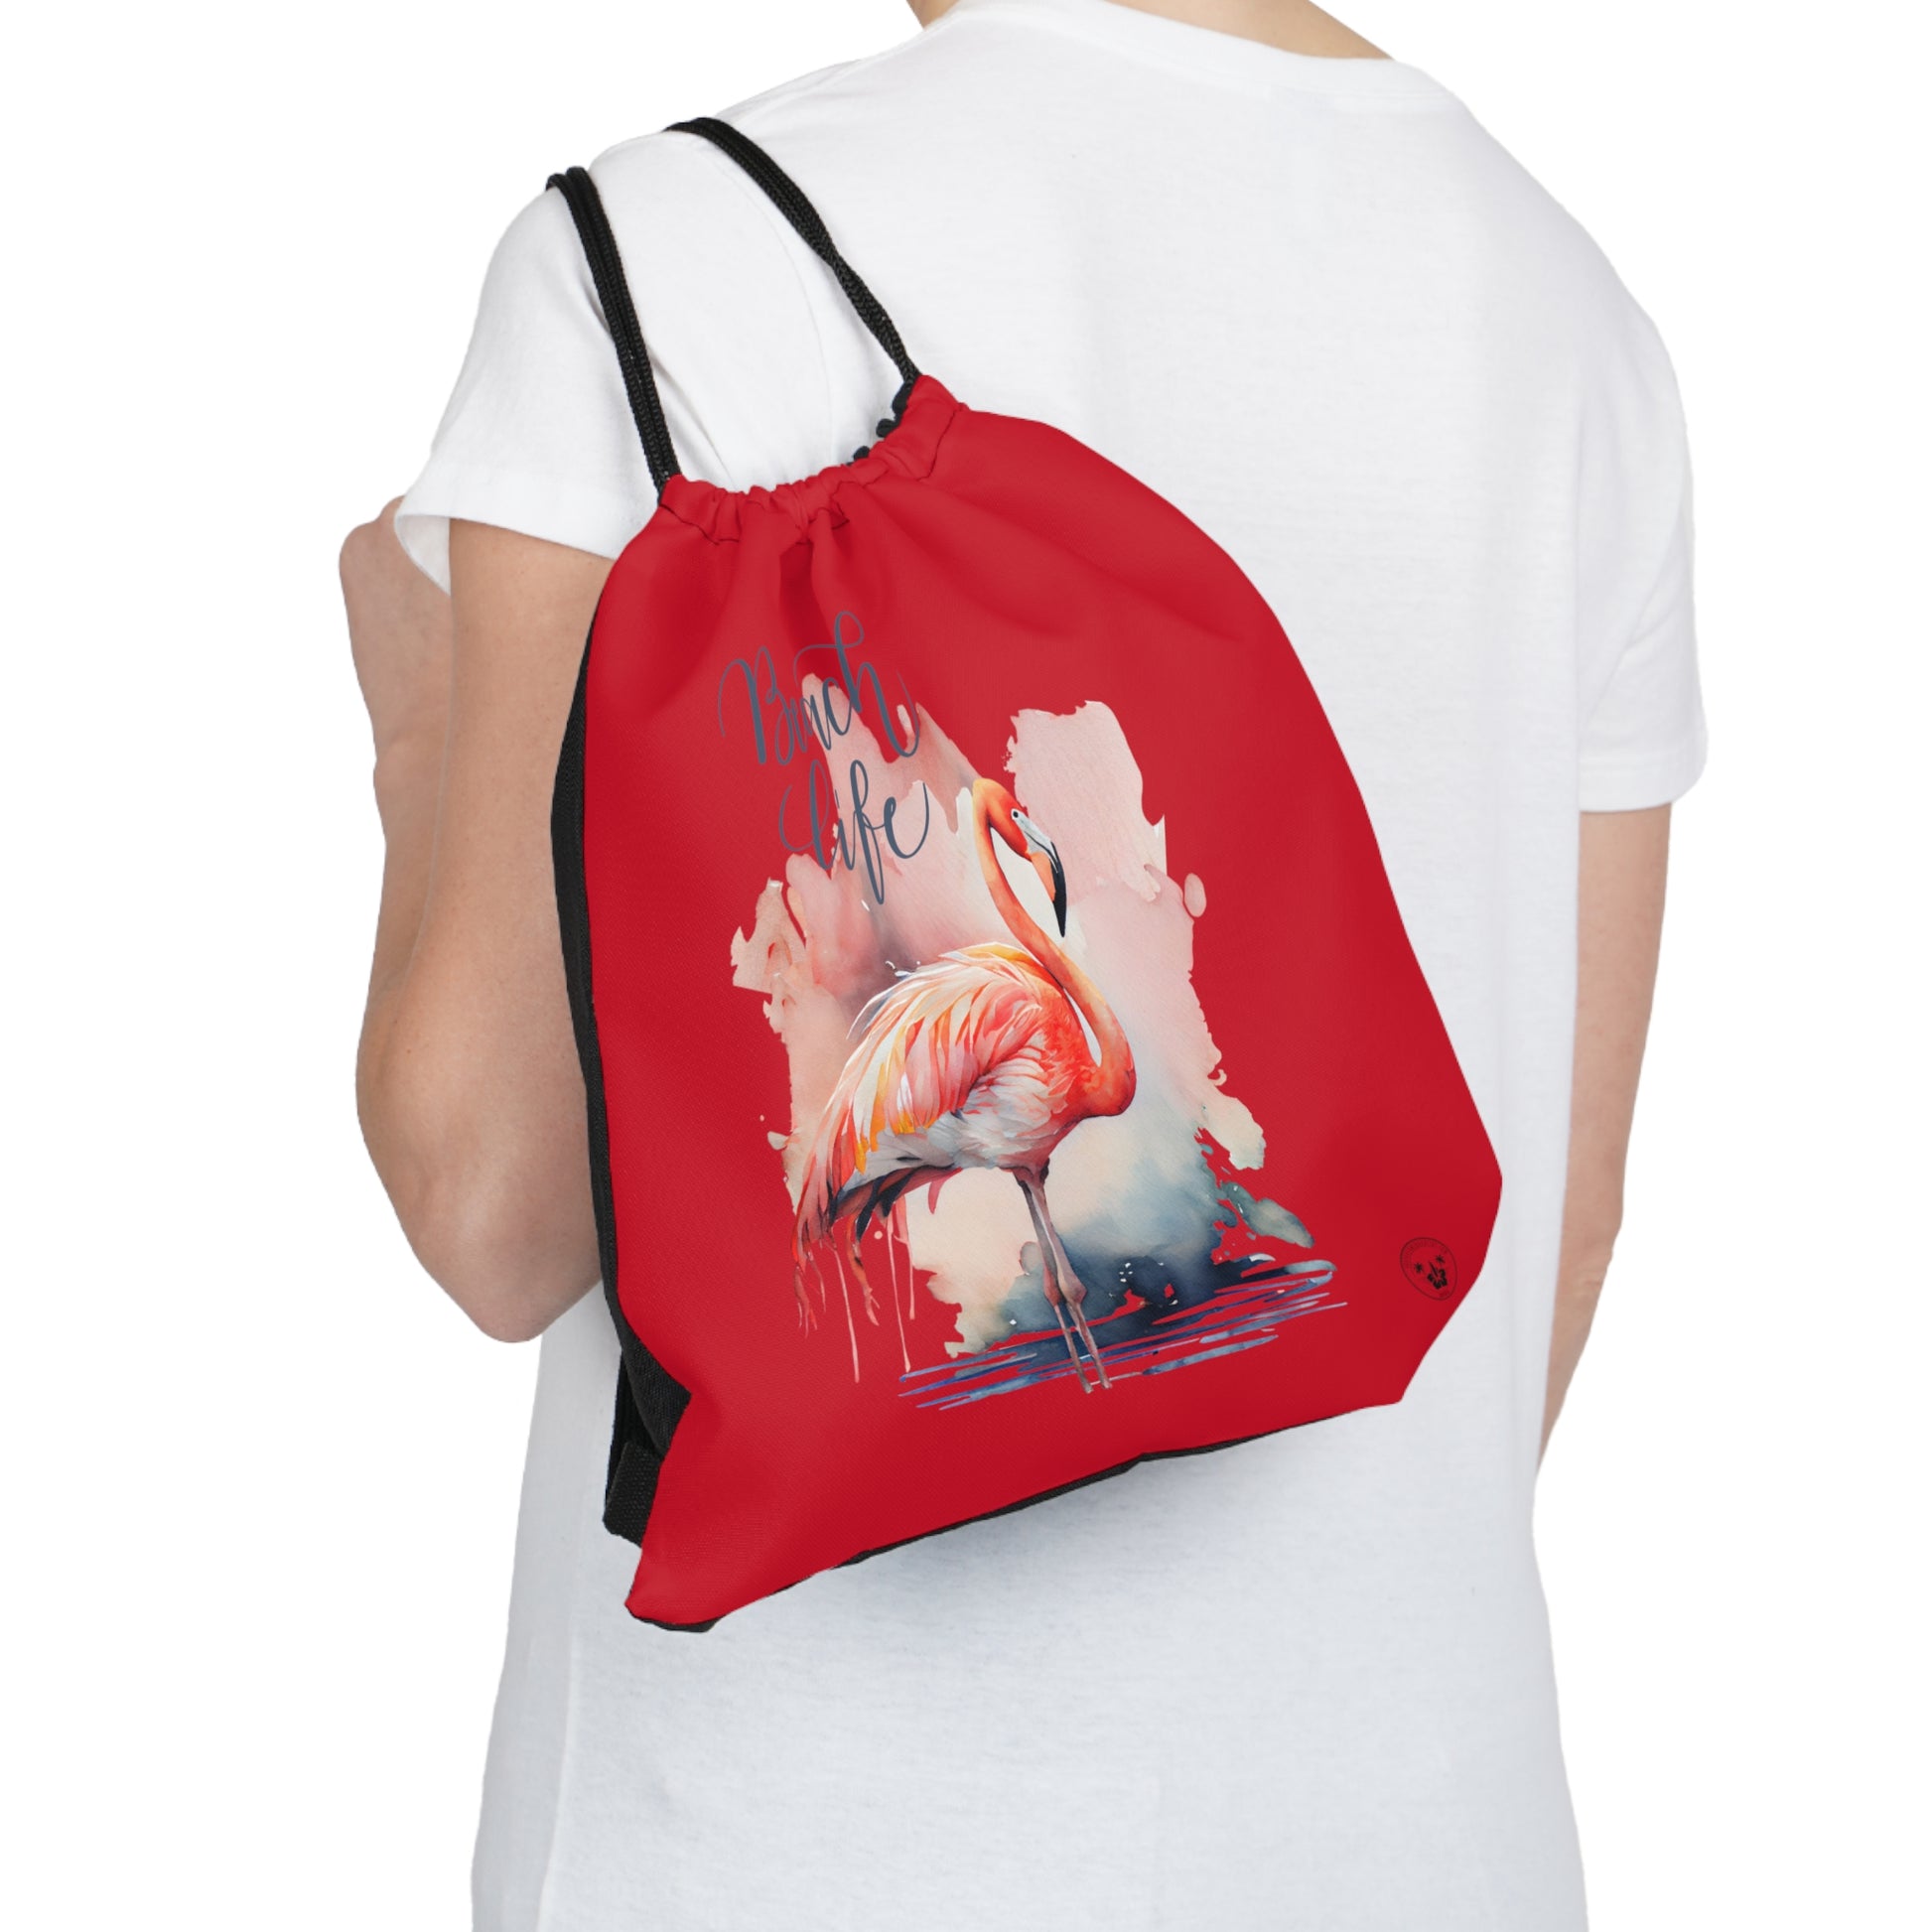 Unleash your wanderlust with our versatile drawstring backpack! Embrace travel with ease and style, flaunting a Beach Life Flamingo graphic with bright color backgrounds. This one is a red background. Designed for adventurers, it's the perfect blend of practicality and fashion. Get yours today for your next adventure! This is a front view of the backpack on the back of a model. 